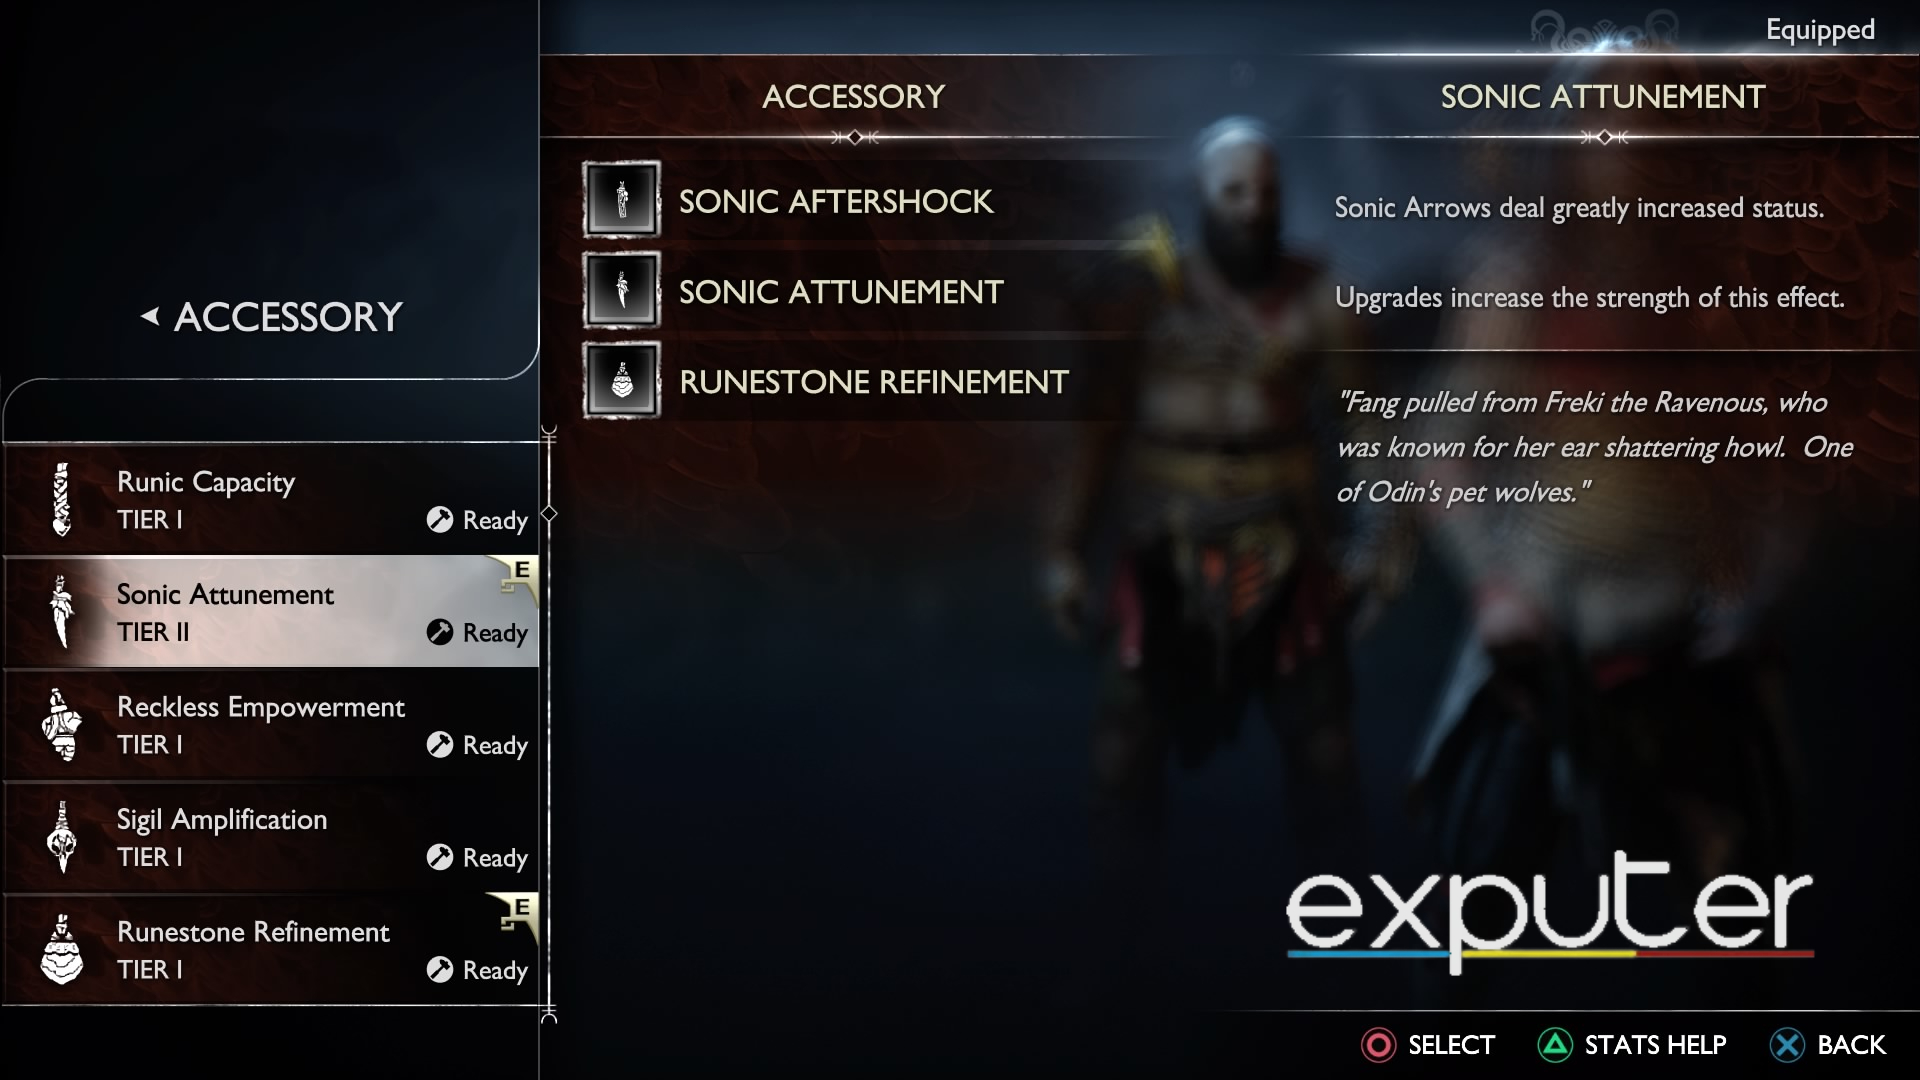 Showcasing the Sonic Attunement Accessory for Atreus